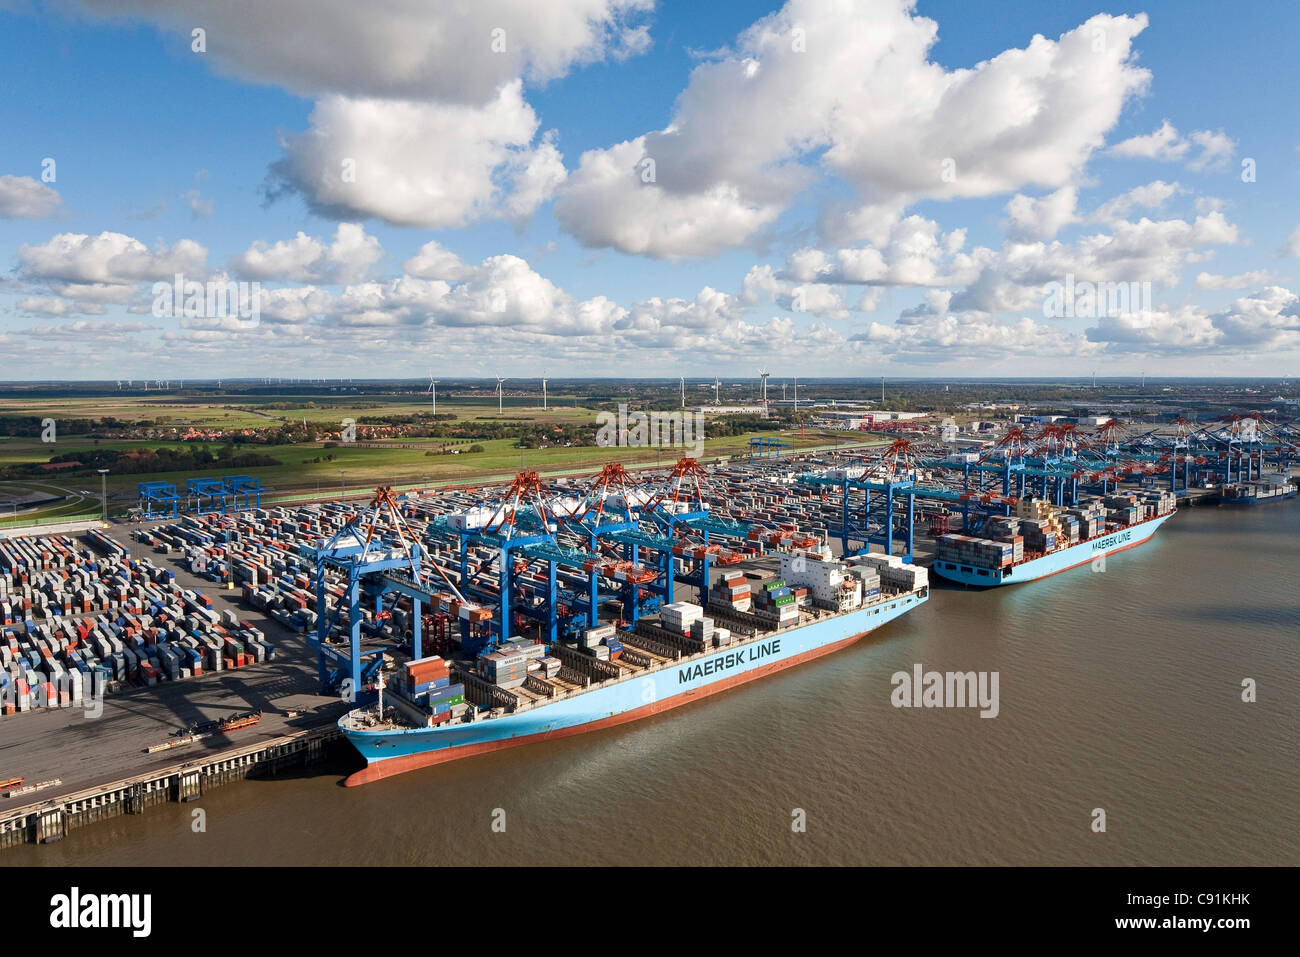 Aerial view of a container port with loading cranes, terminal and ships along the pier, Bremerhaven, Bremen, Germany Stock Photo